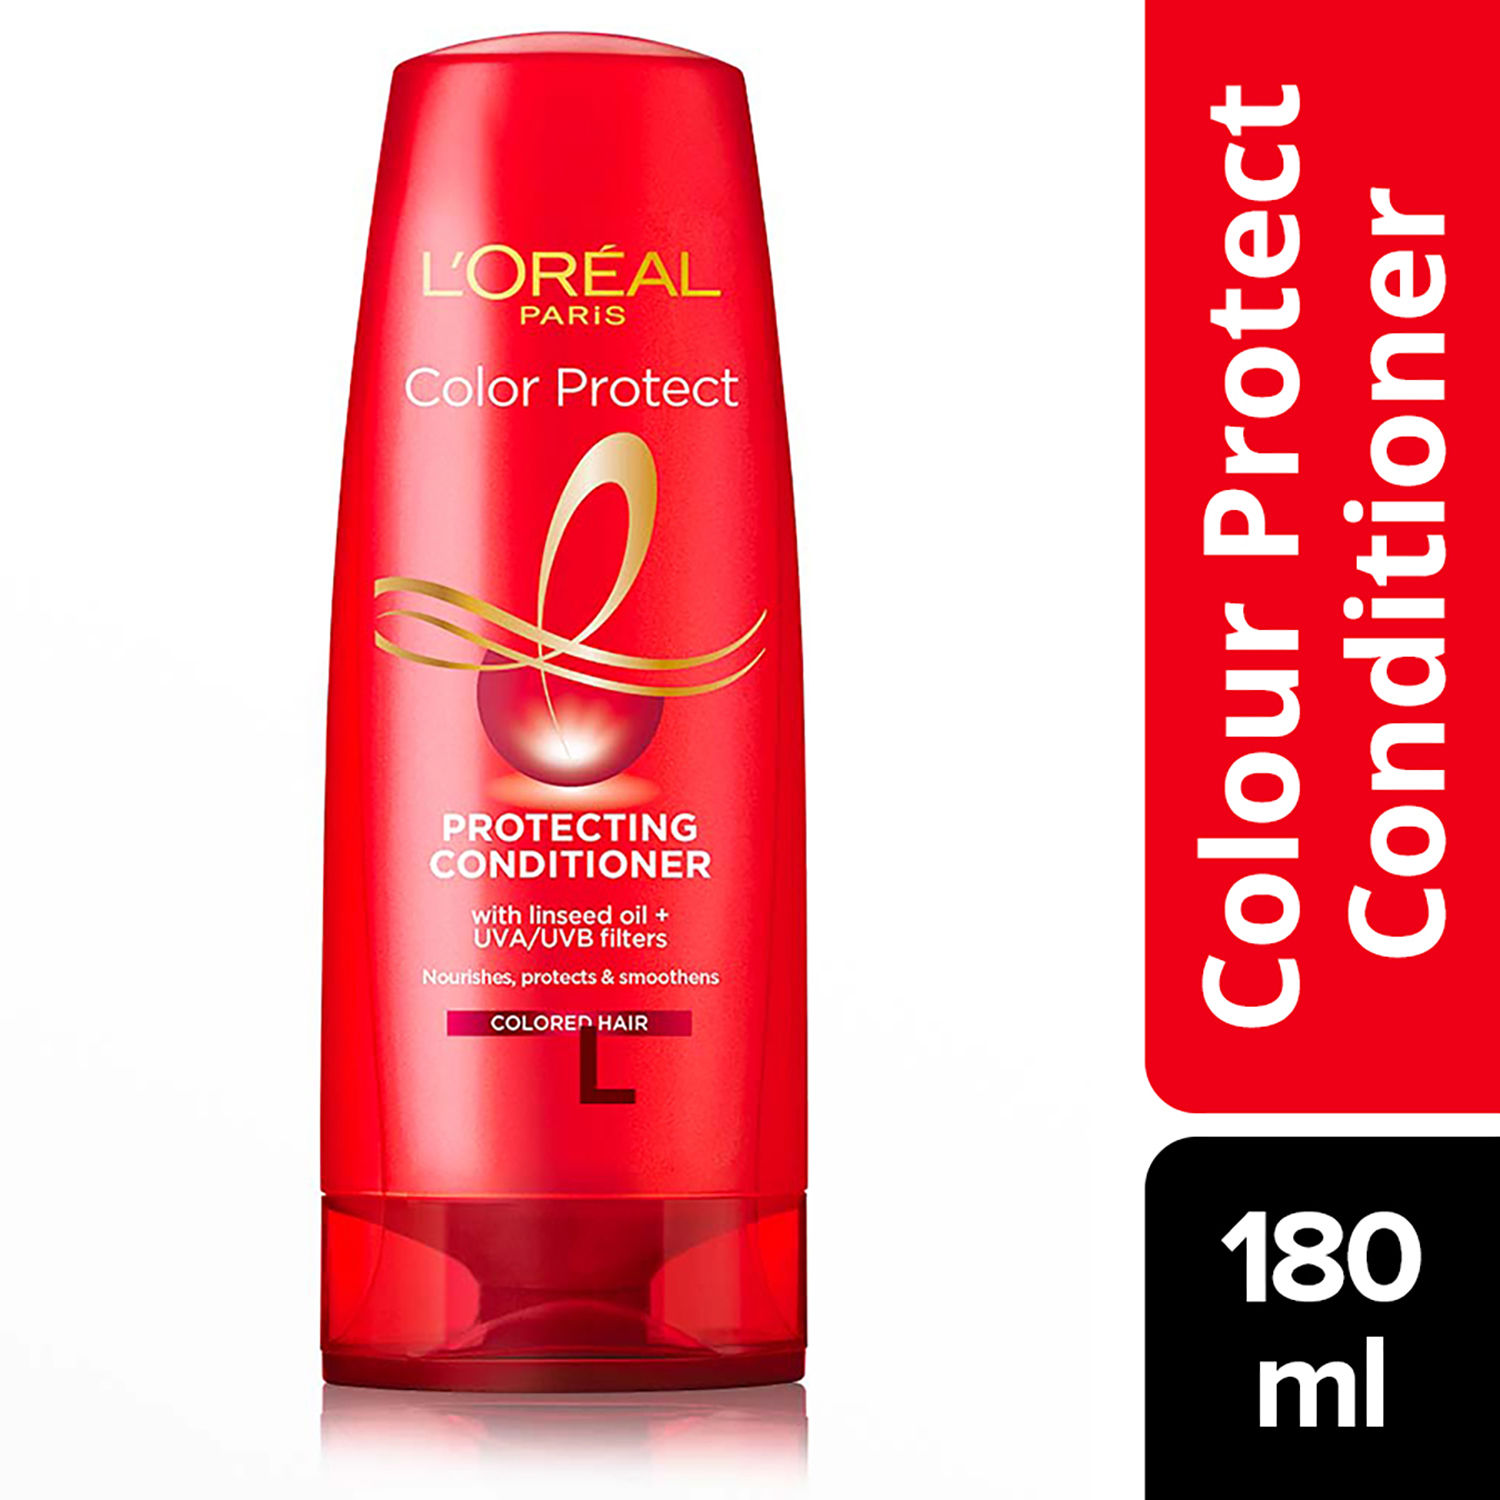 Buy L'Oreal Paris Colour Protect Protecting Condtioner (180 ml) - Purplle